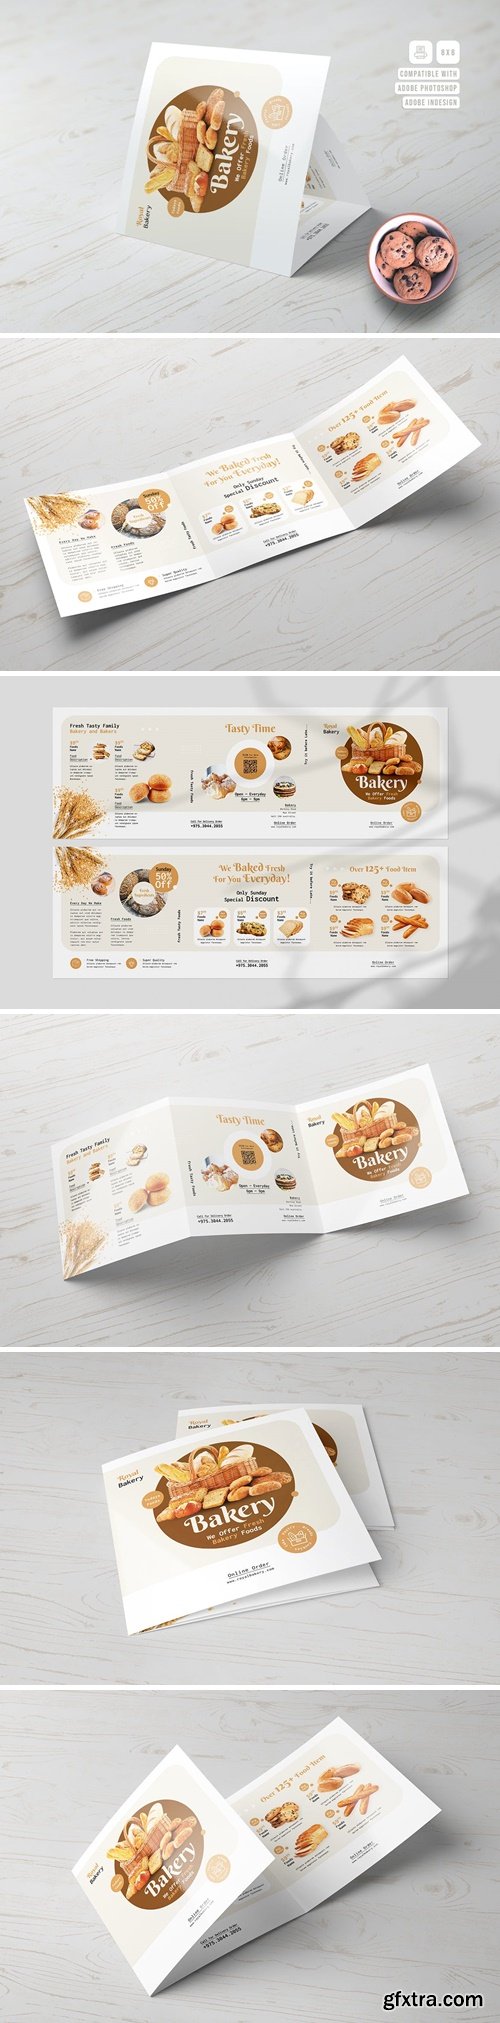 Bakery Food Square Trifold Brochure 36RZ8GM